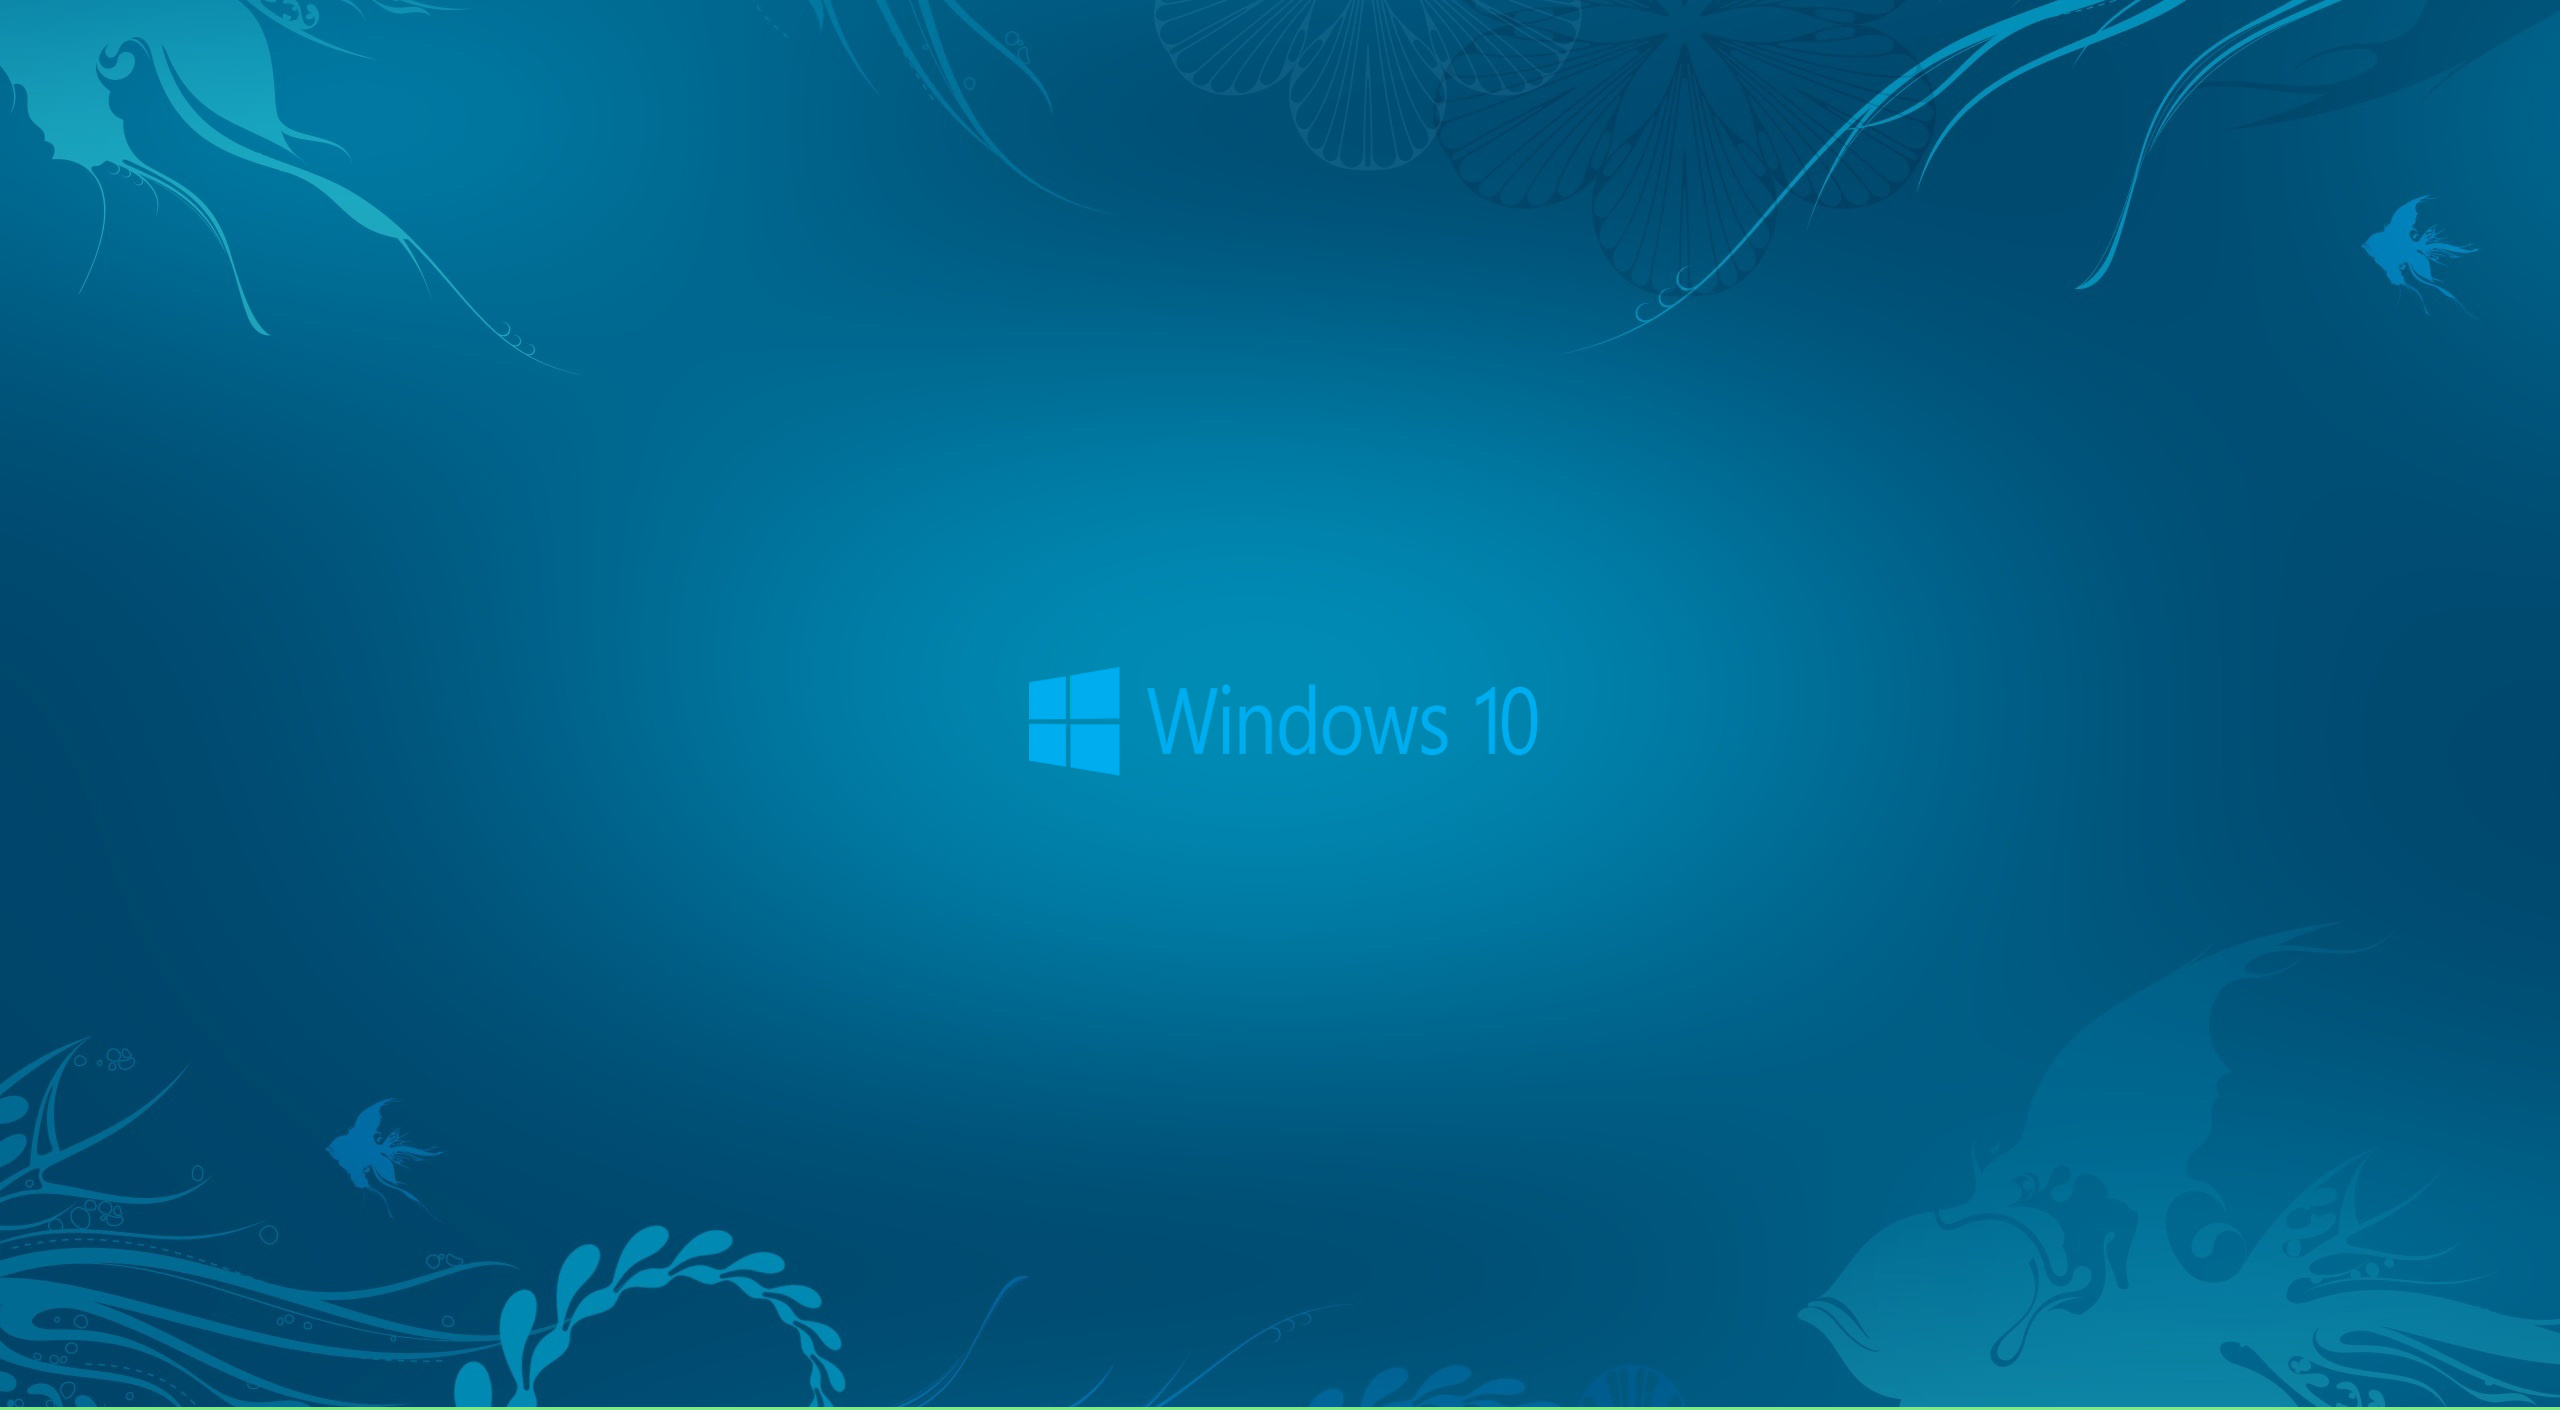  Windows 10 Wallpaper with new logo on deep blue sea HD Wallpapers